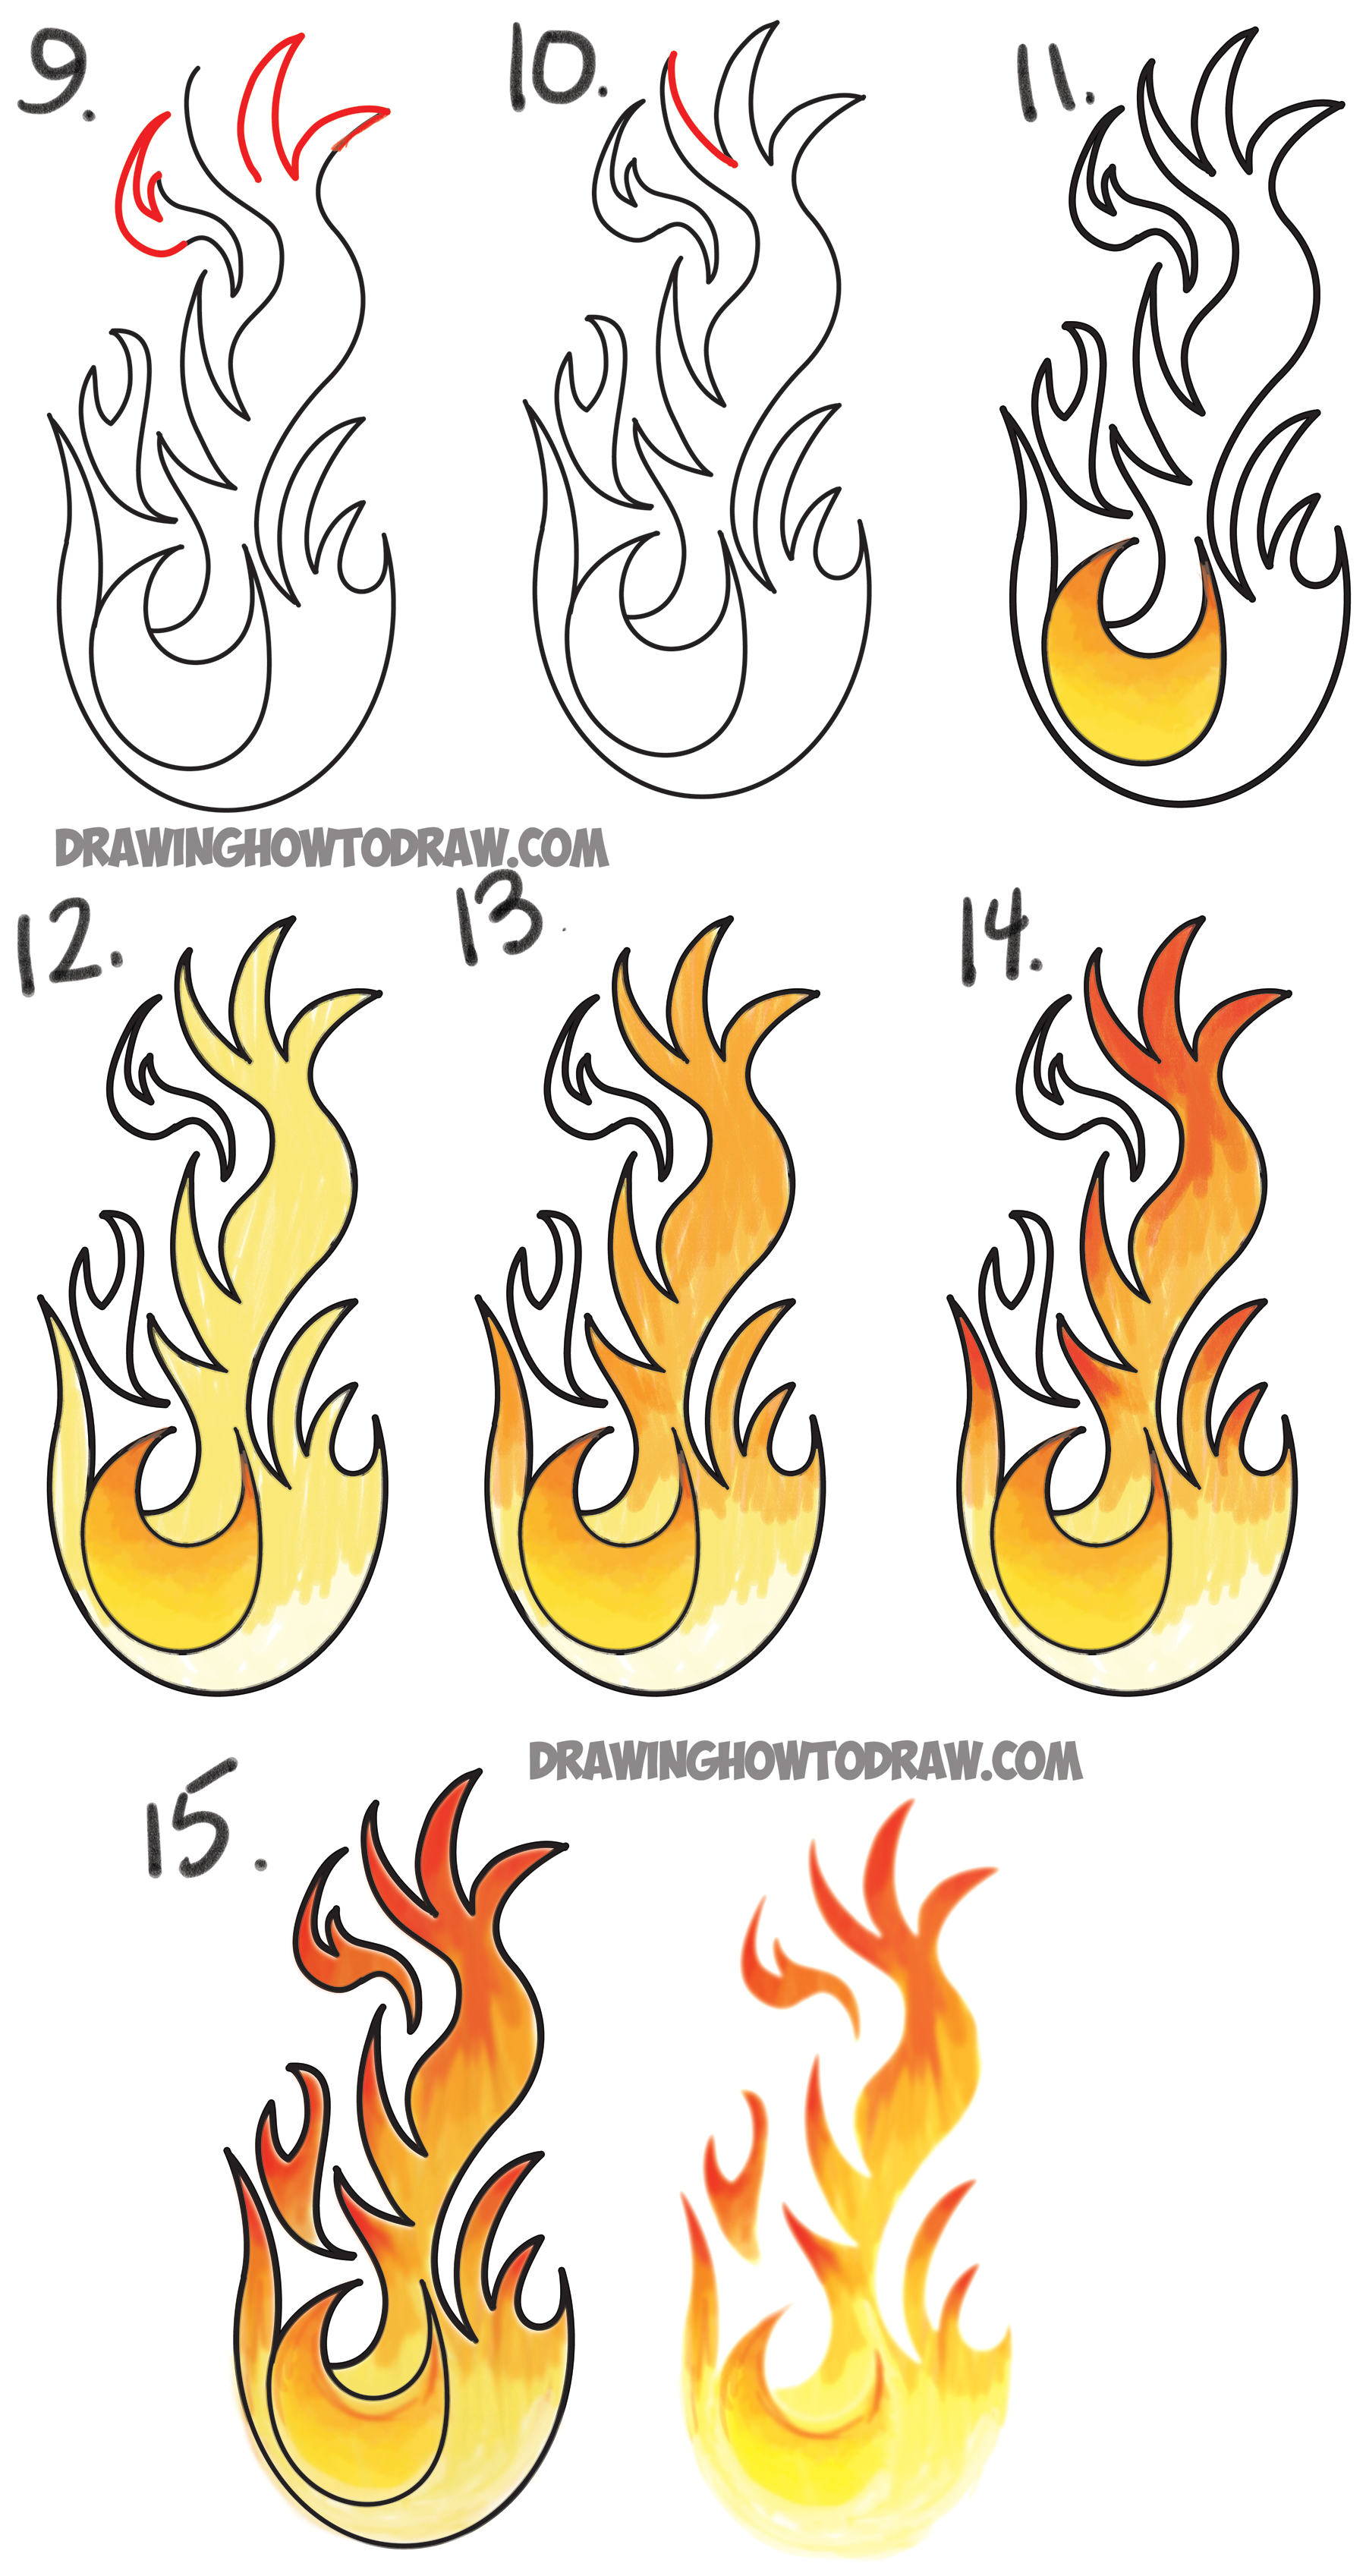 How to Draw Flames and Drawing Cartoon Fire Drawing Tutorial How to